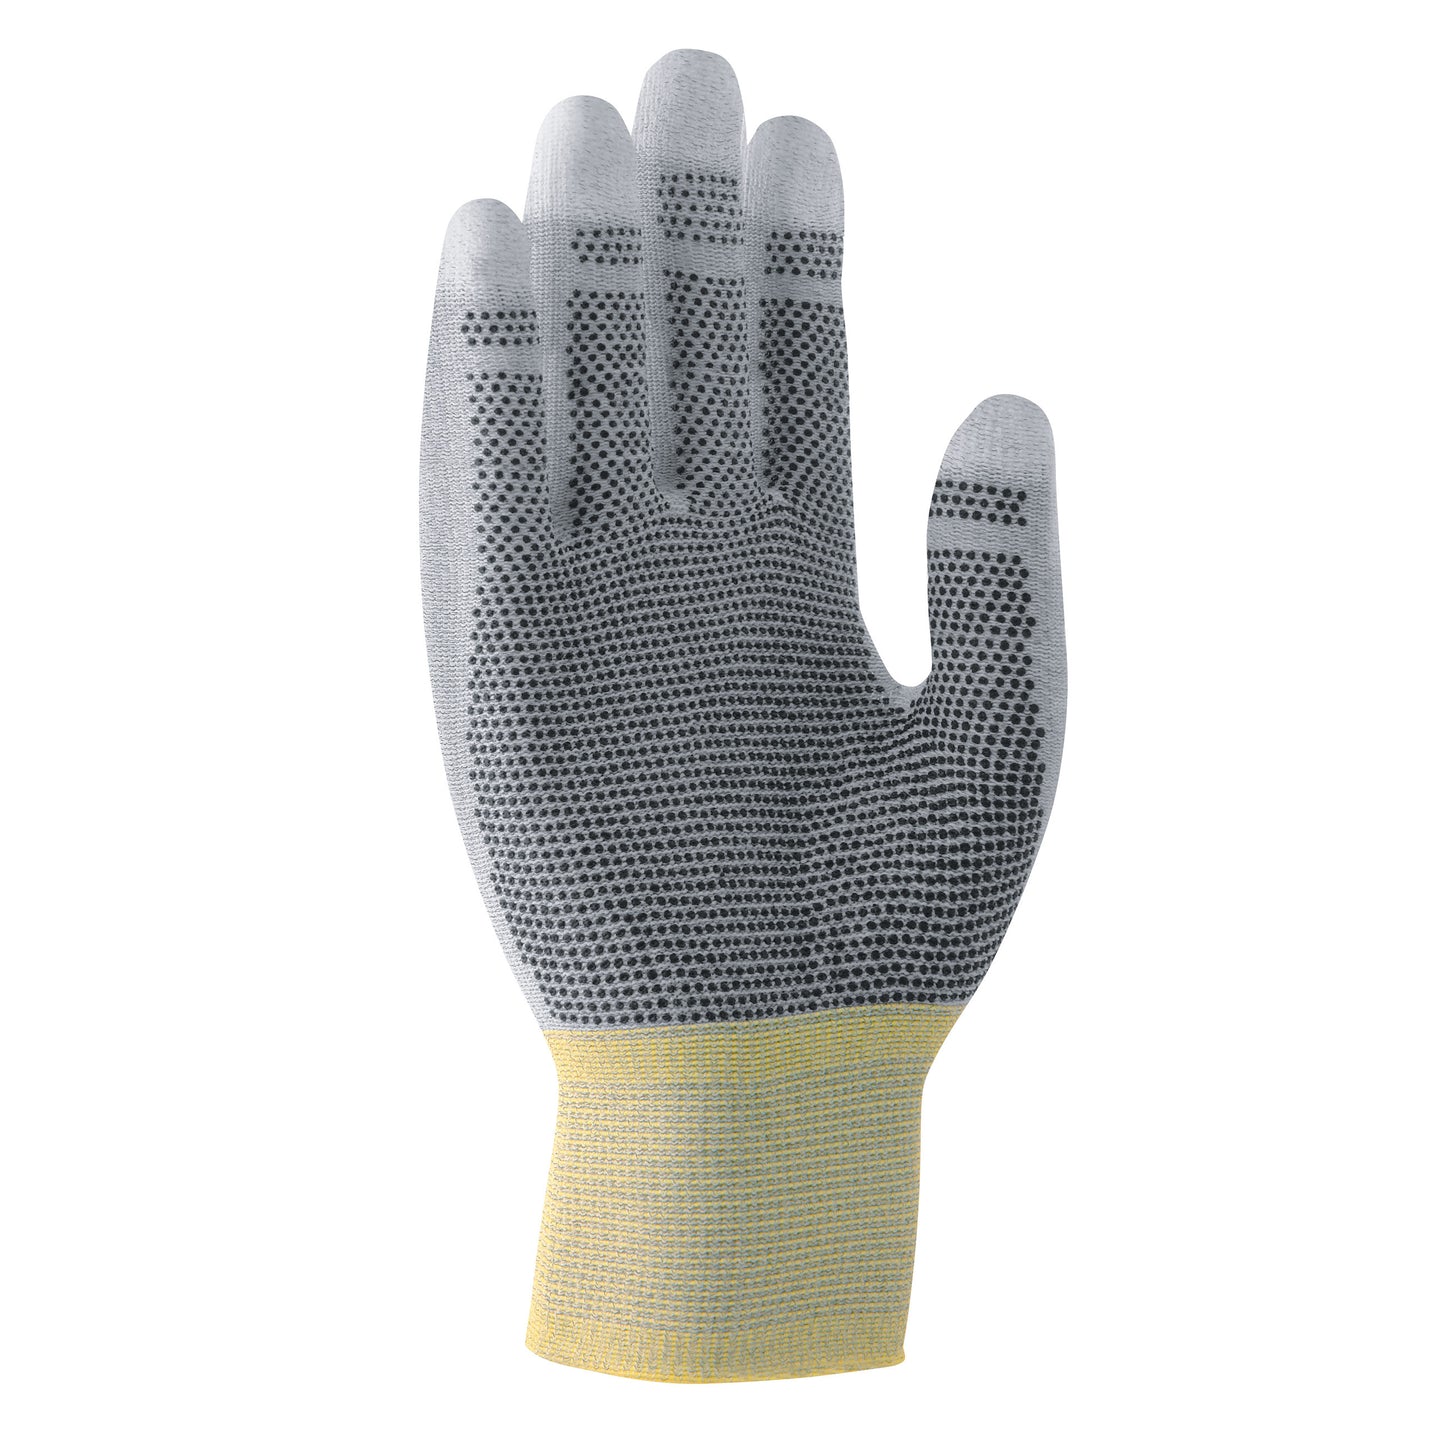 uvex unipur carbon Antistatic ESD Protective Gloves Microdot Palm